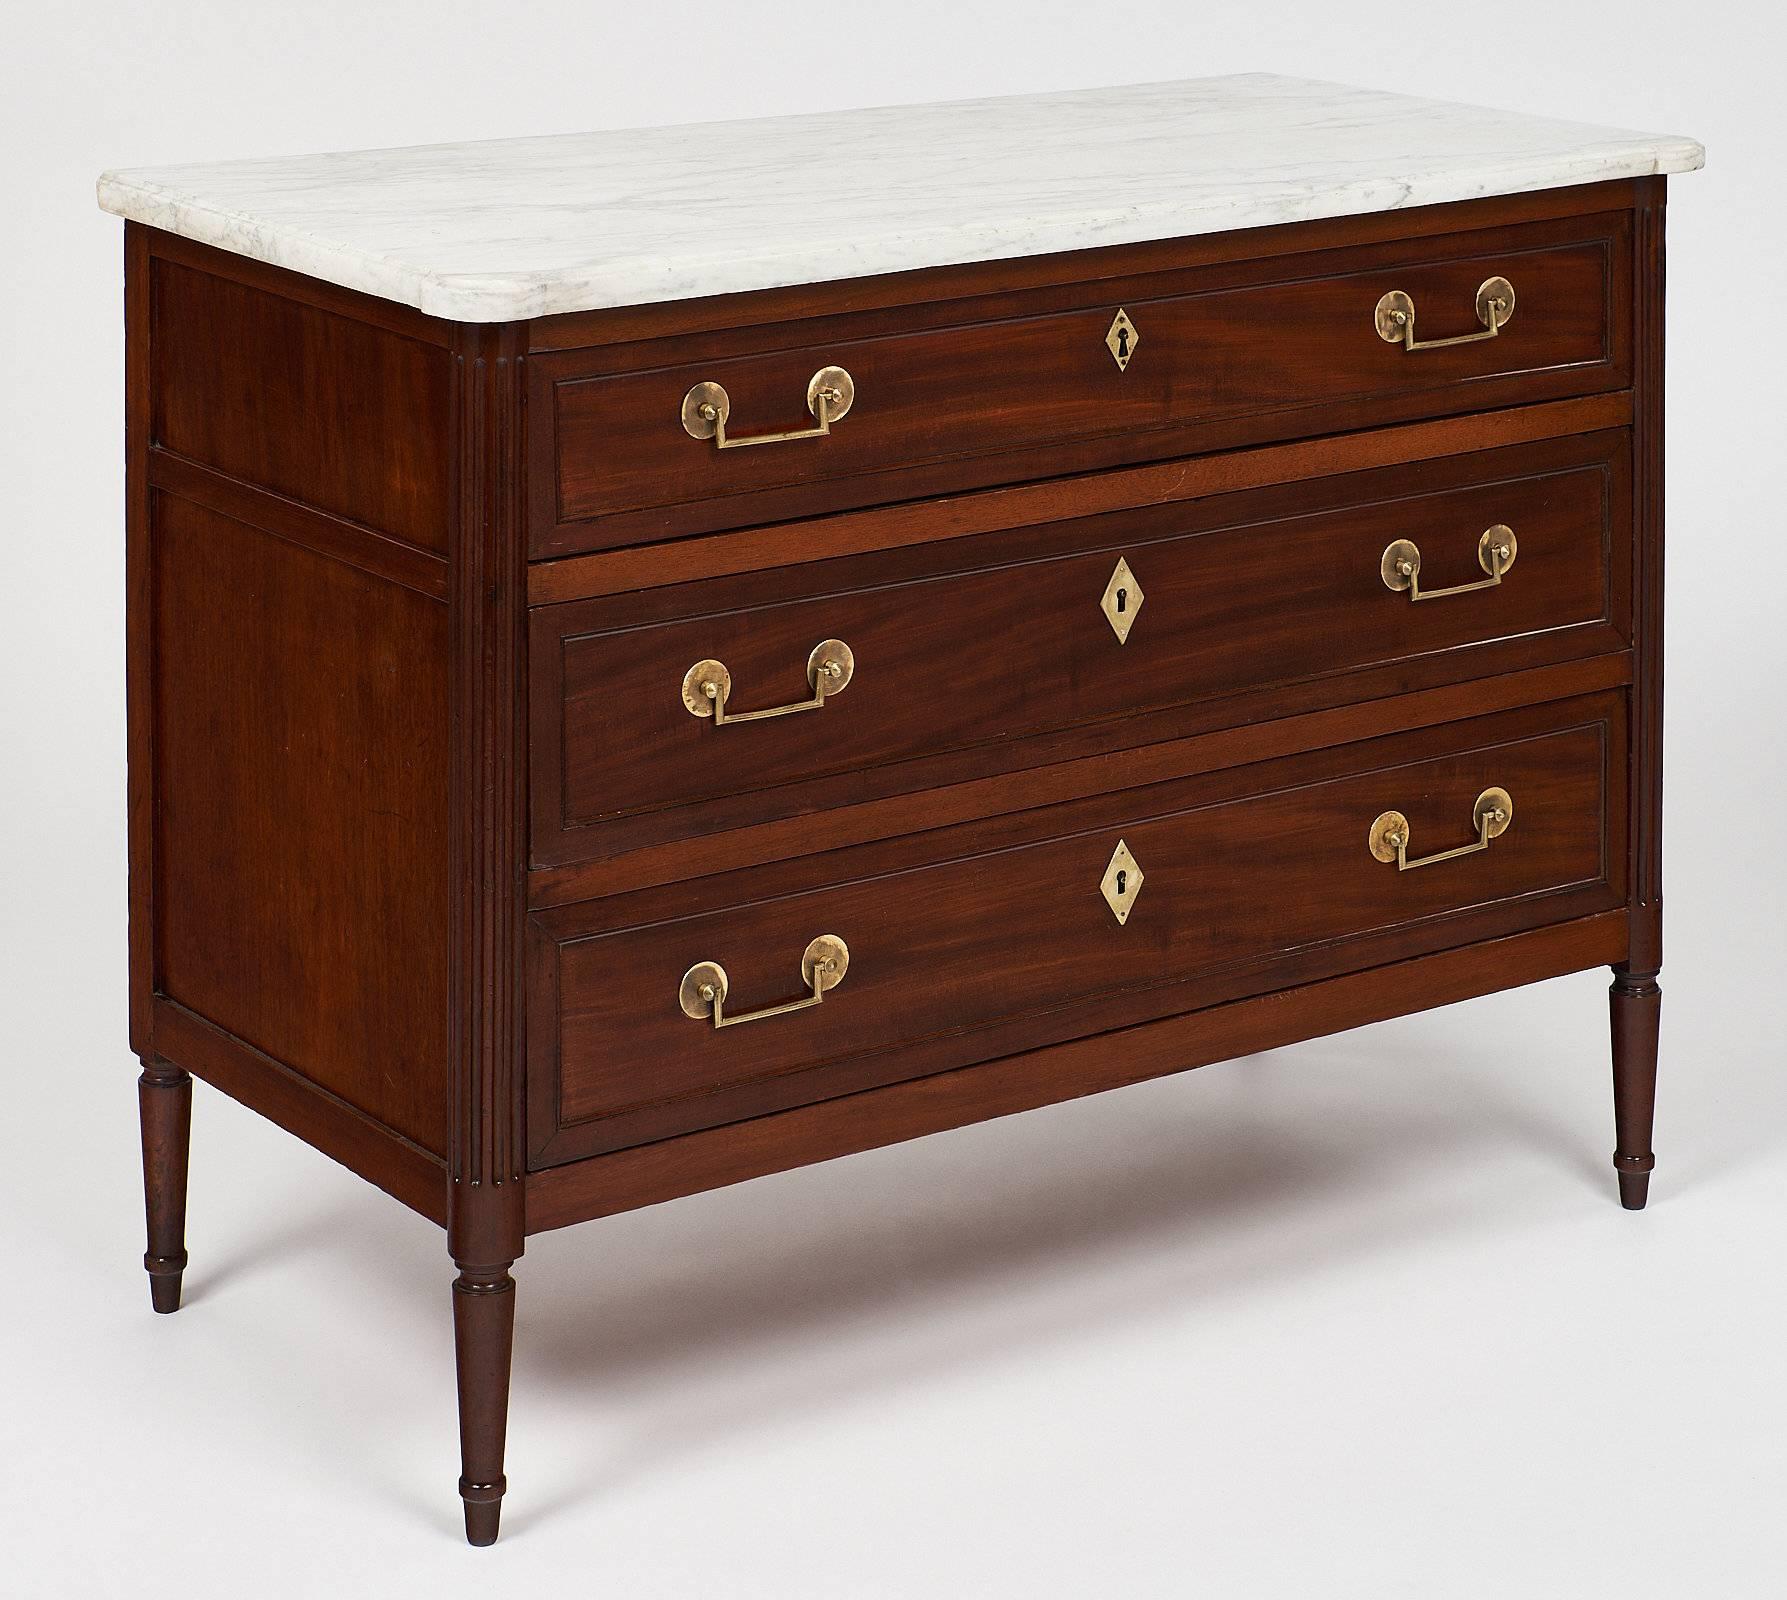 A fine French mahogany chest of three dovetailed drawers. Oak was used as a secondary wood, and gilt brass trim is found throughout. It has tapered “toupie” legs. The “commode” features an original and very clean Carrara marble slab, lightly veined.